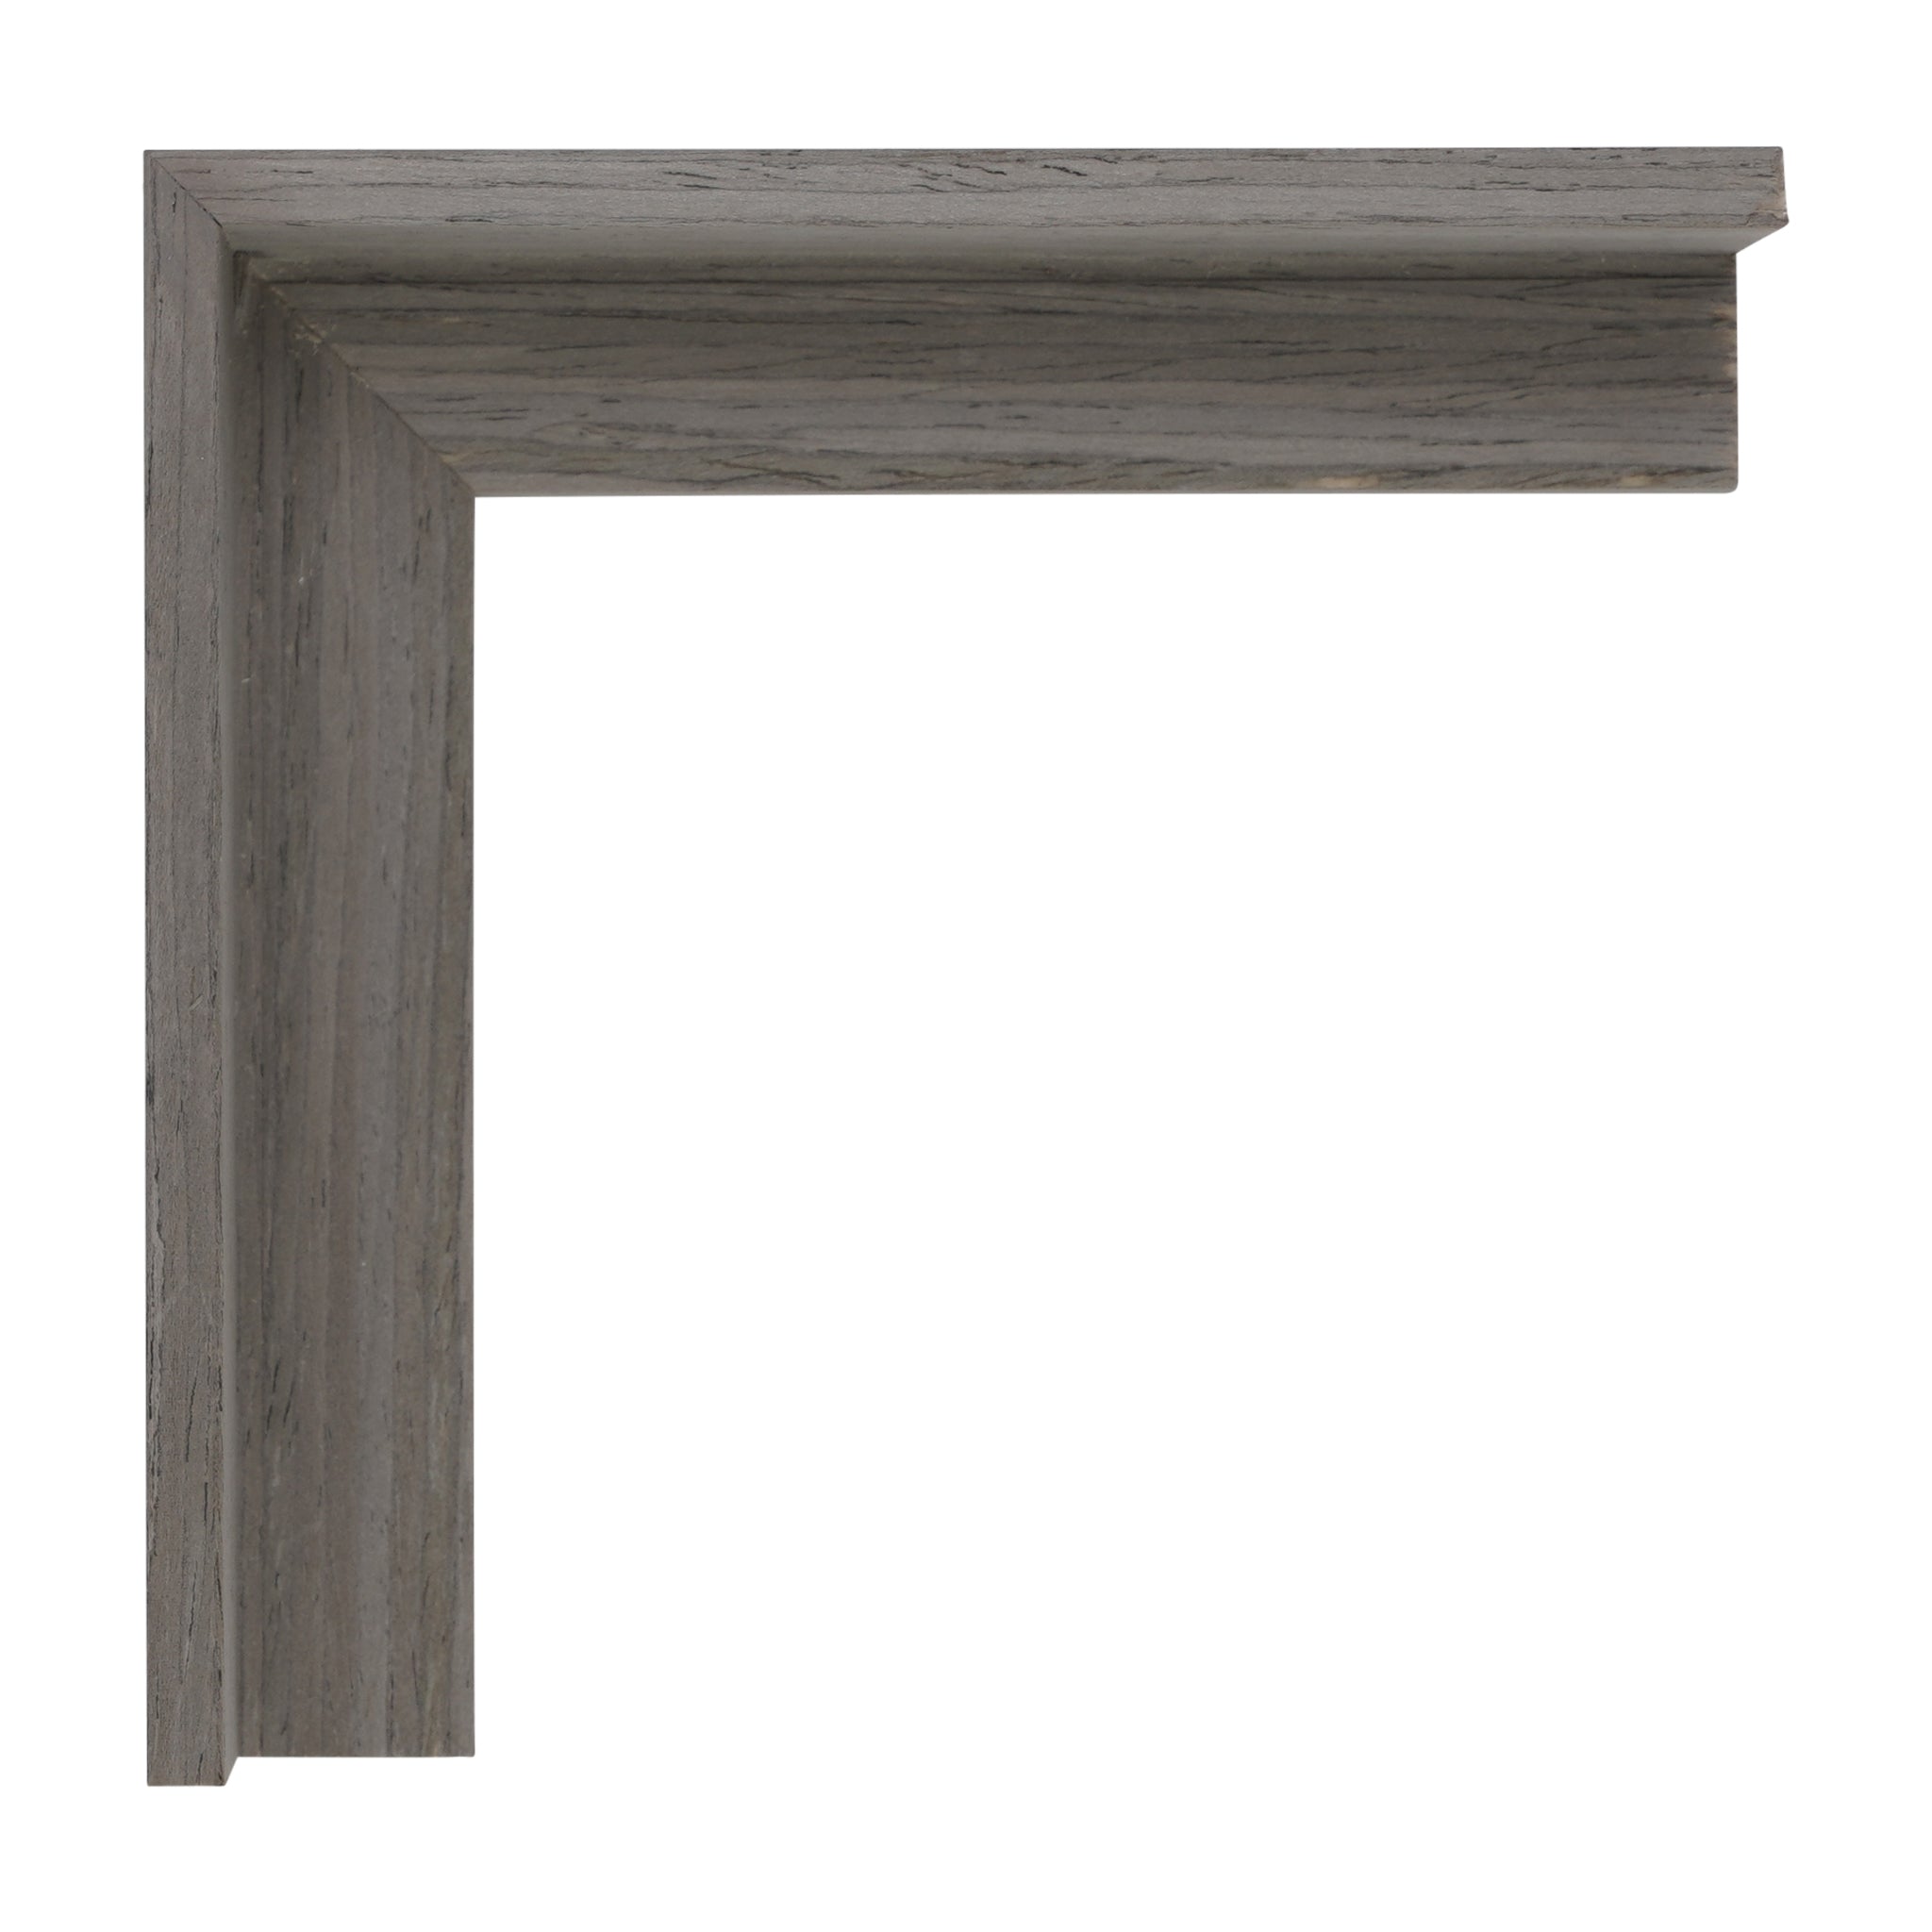 Charcoal Float Frame, Grey, Sold by at Home